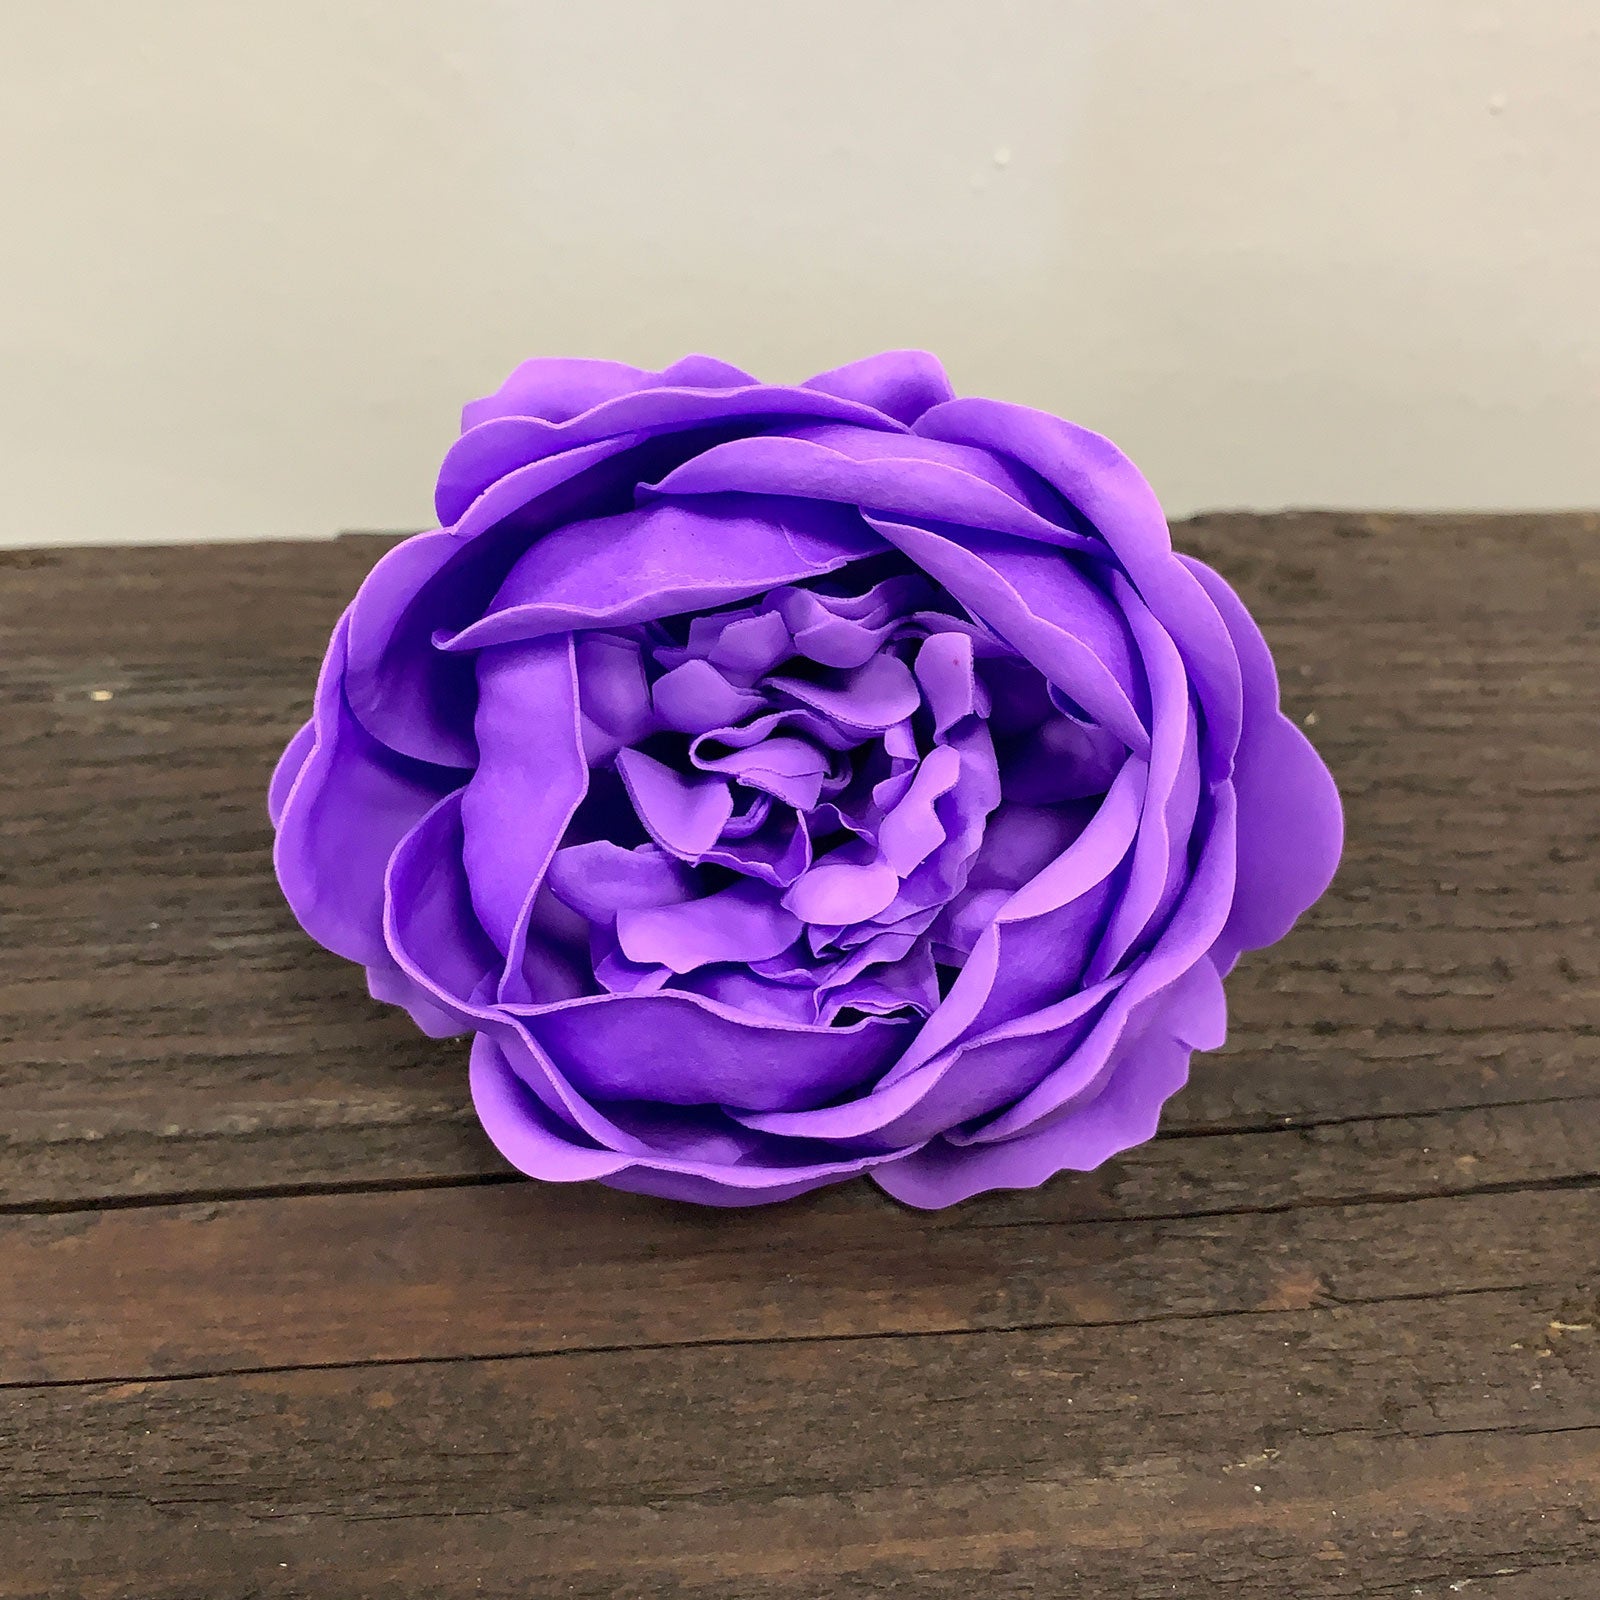 Craft Soap Flower - Ext Large Peony - Lavender-